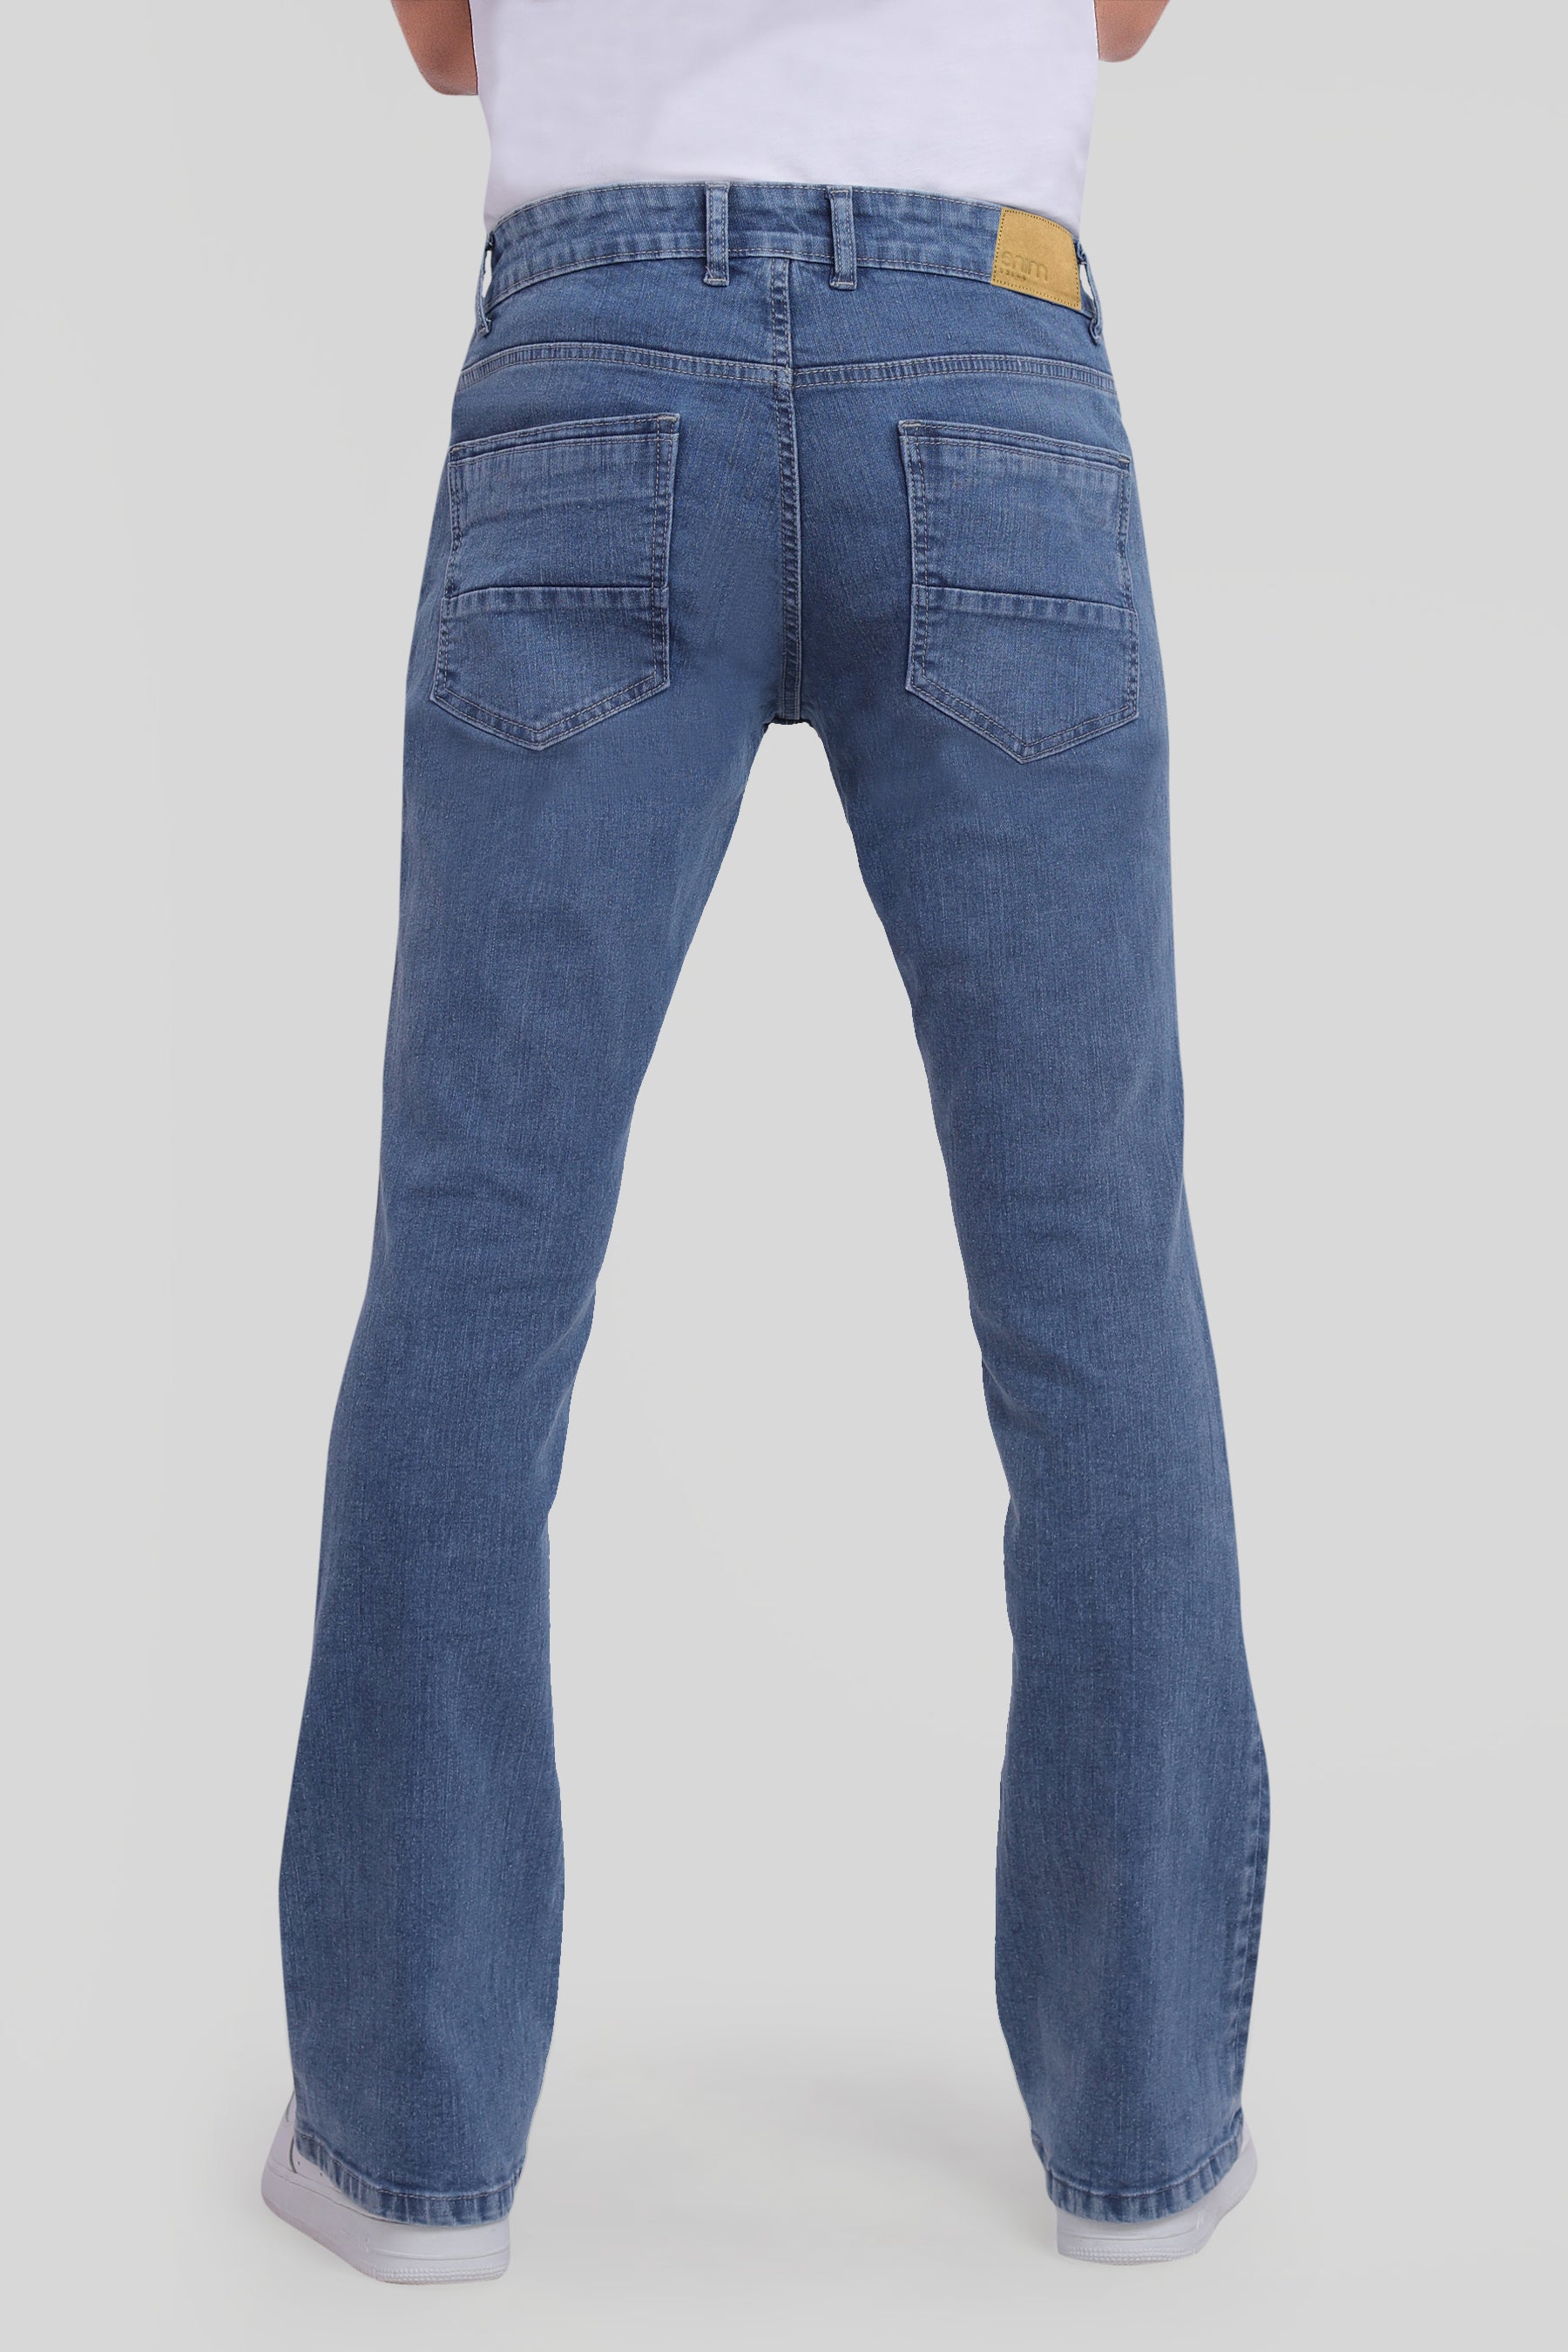 Buy GUESS Navy Low Rise Washed Bootcut Jeans - Jeans for Men 1127574 |  Myntra